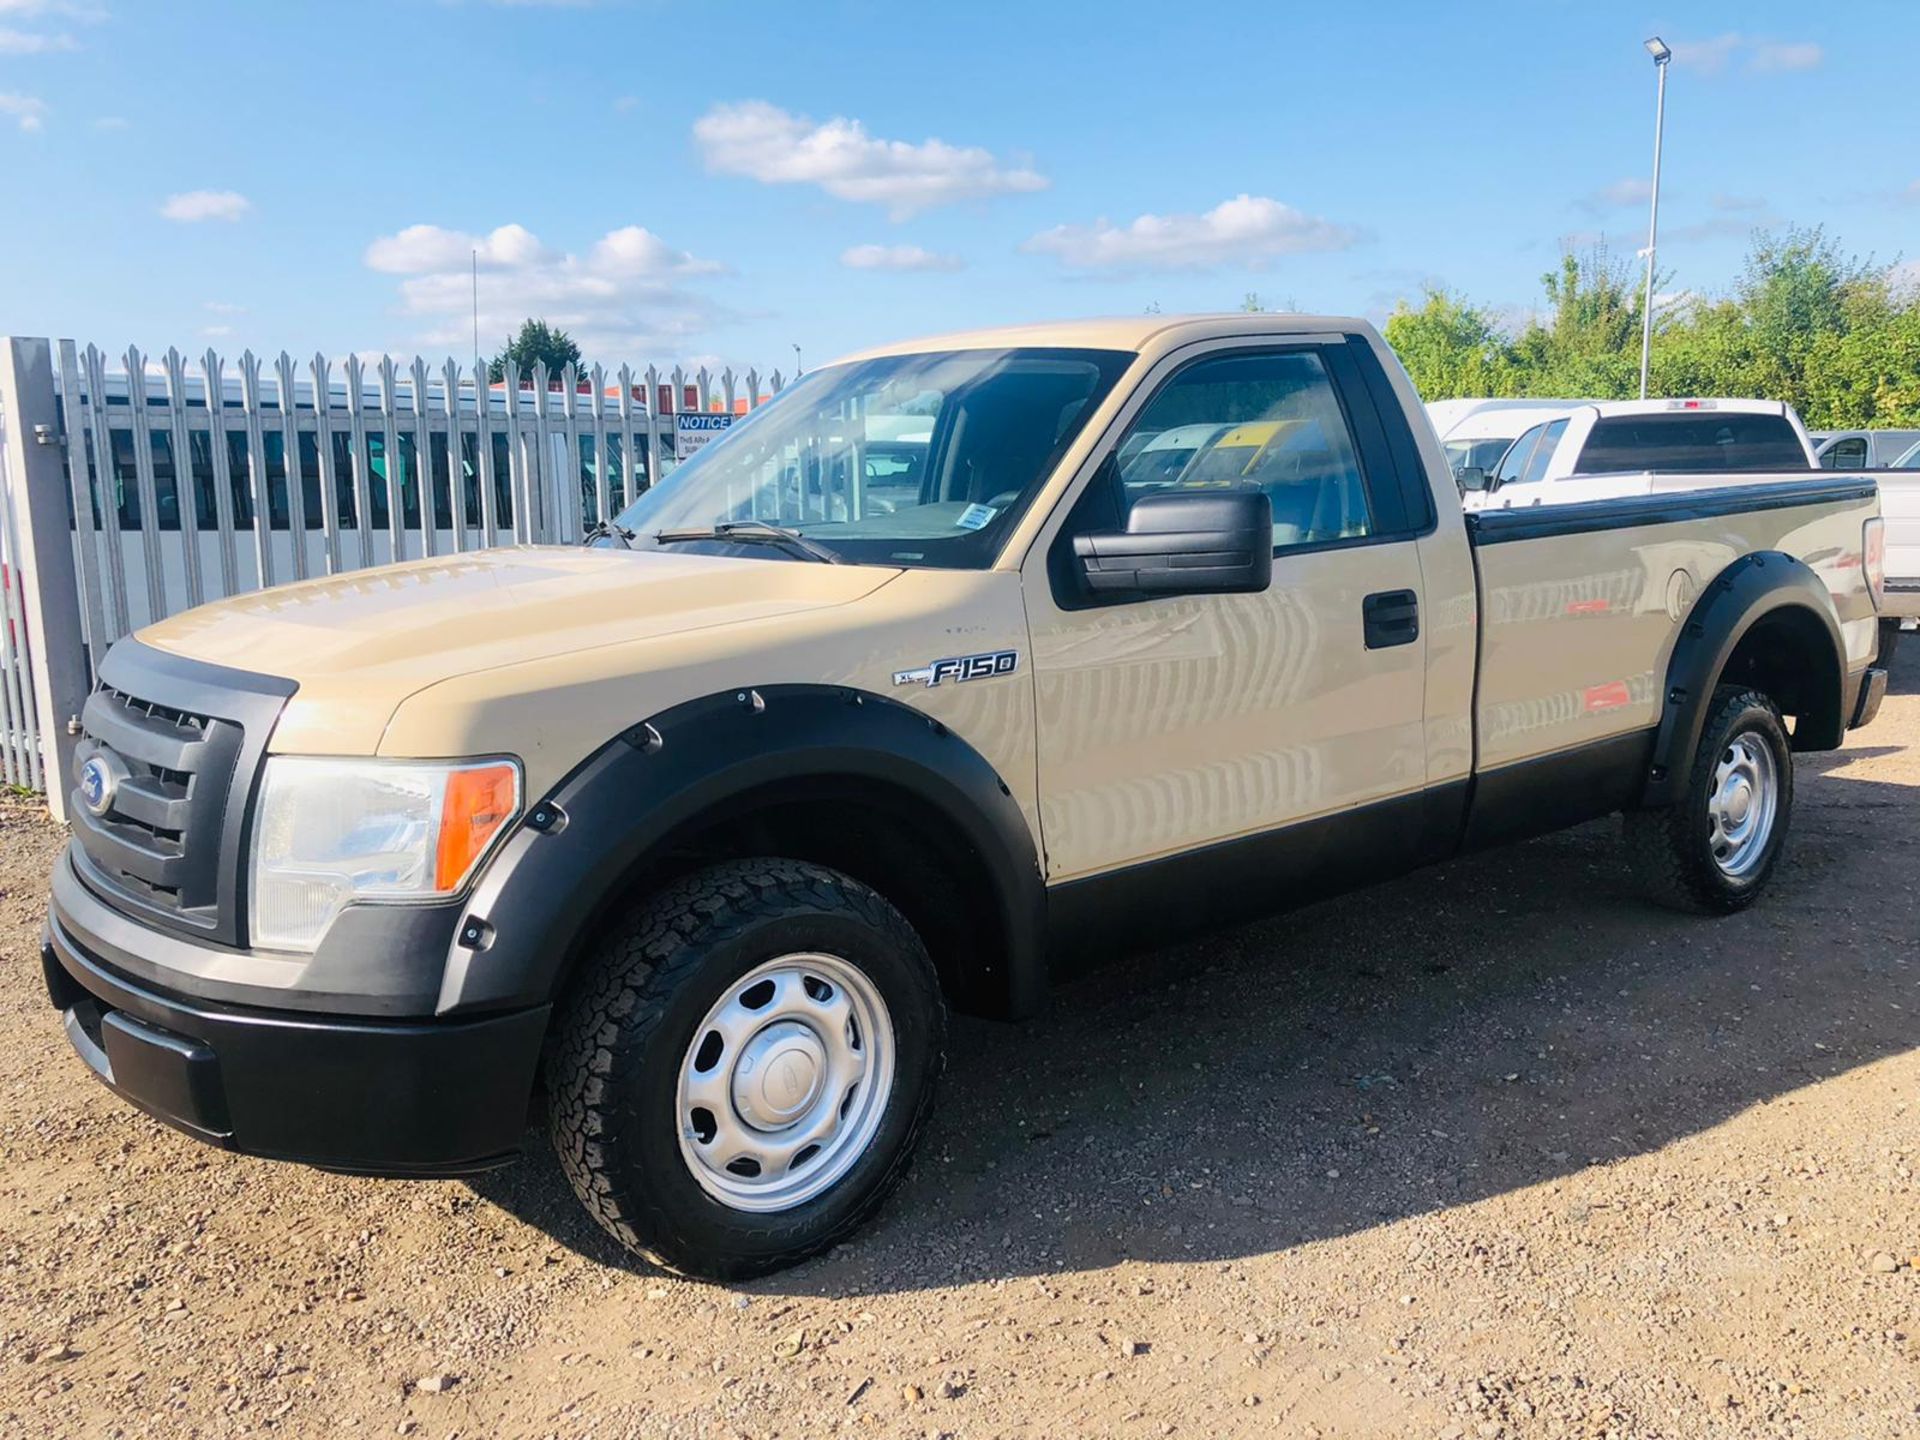 Ford F-150 4.6L V8 Single-Cab '2010 Year' Air Con - Fresh Import - No vat Save 20% - **No Reserve** - Image 3 of 15